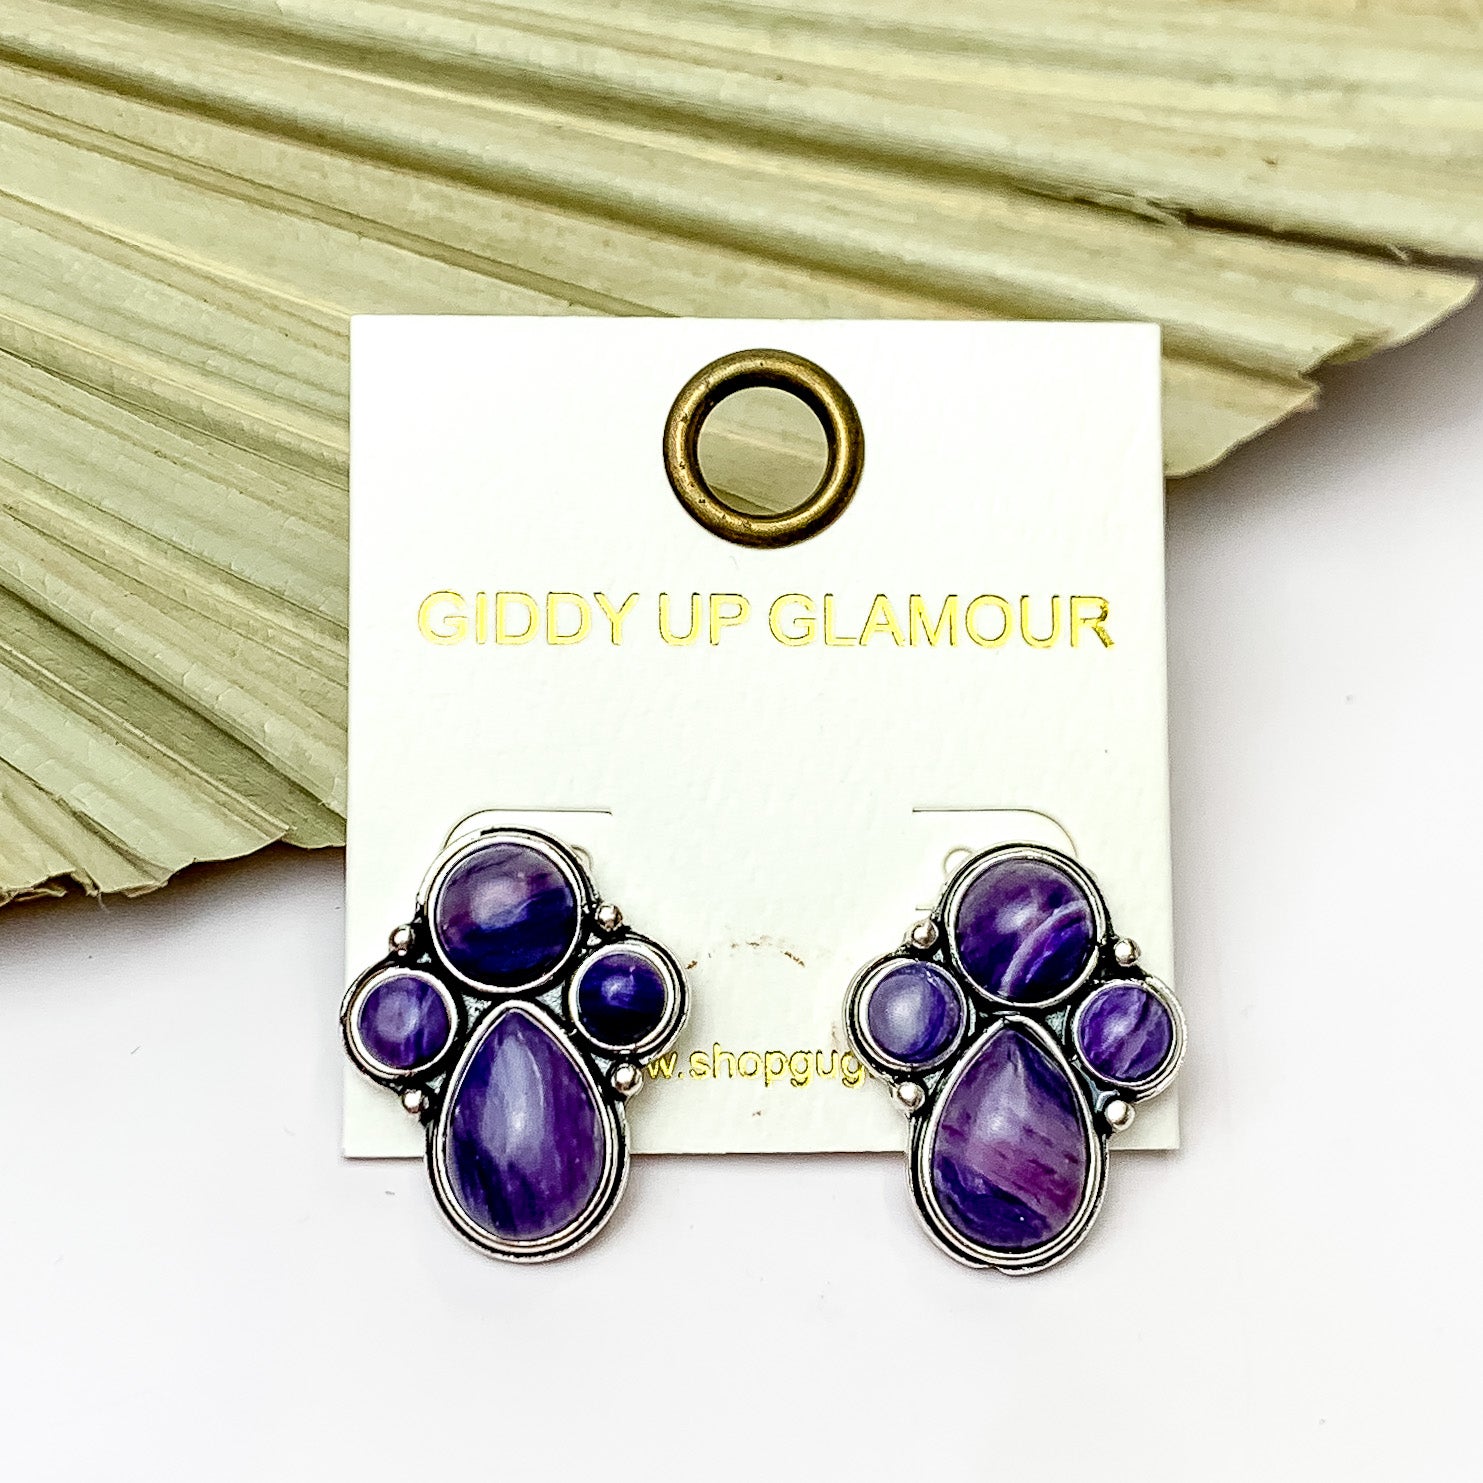 Silver Tone Cluster Stone Earrings in Purple. Pictured on a white background with a leaf fan behind the earrings.